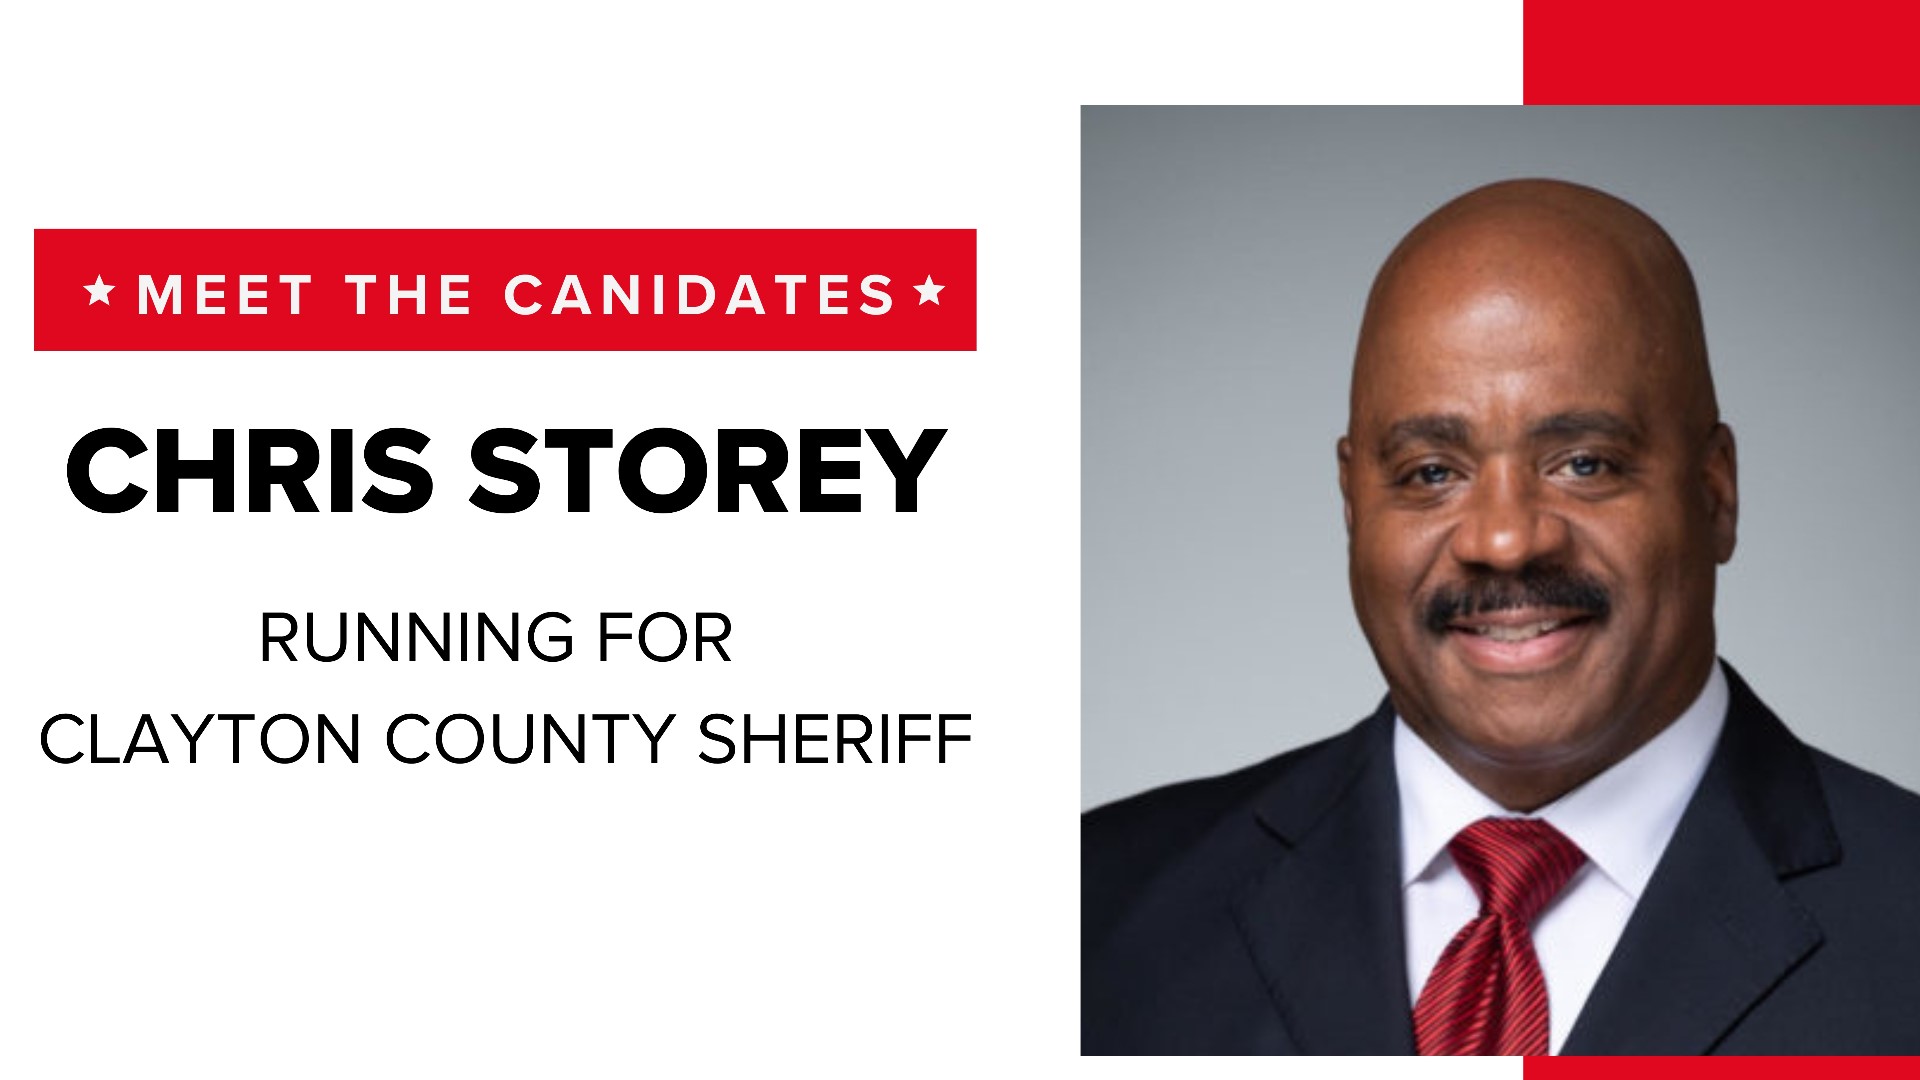 Chris Storey, a longtime law enforcement officer with the Clayton County Sheriff's Office, said he's seen the agency take a turn and wants to course correct.